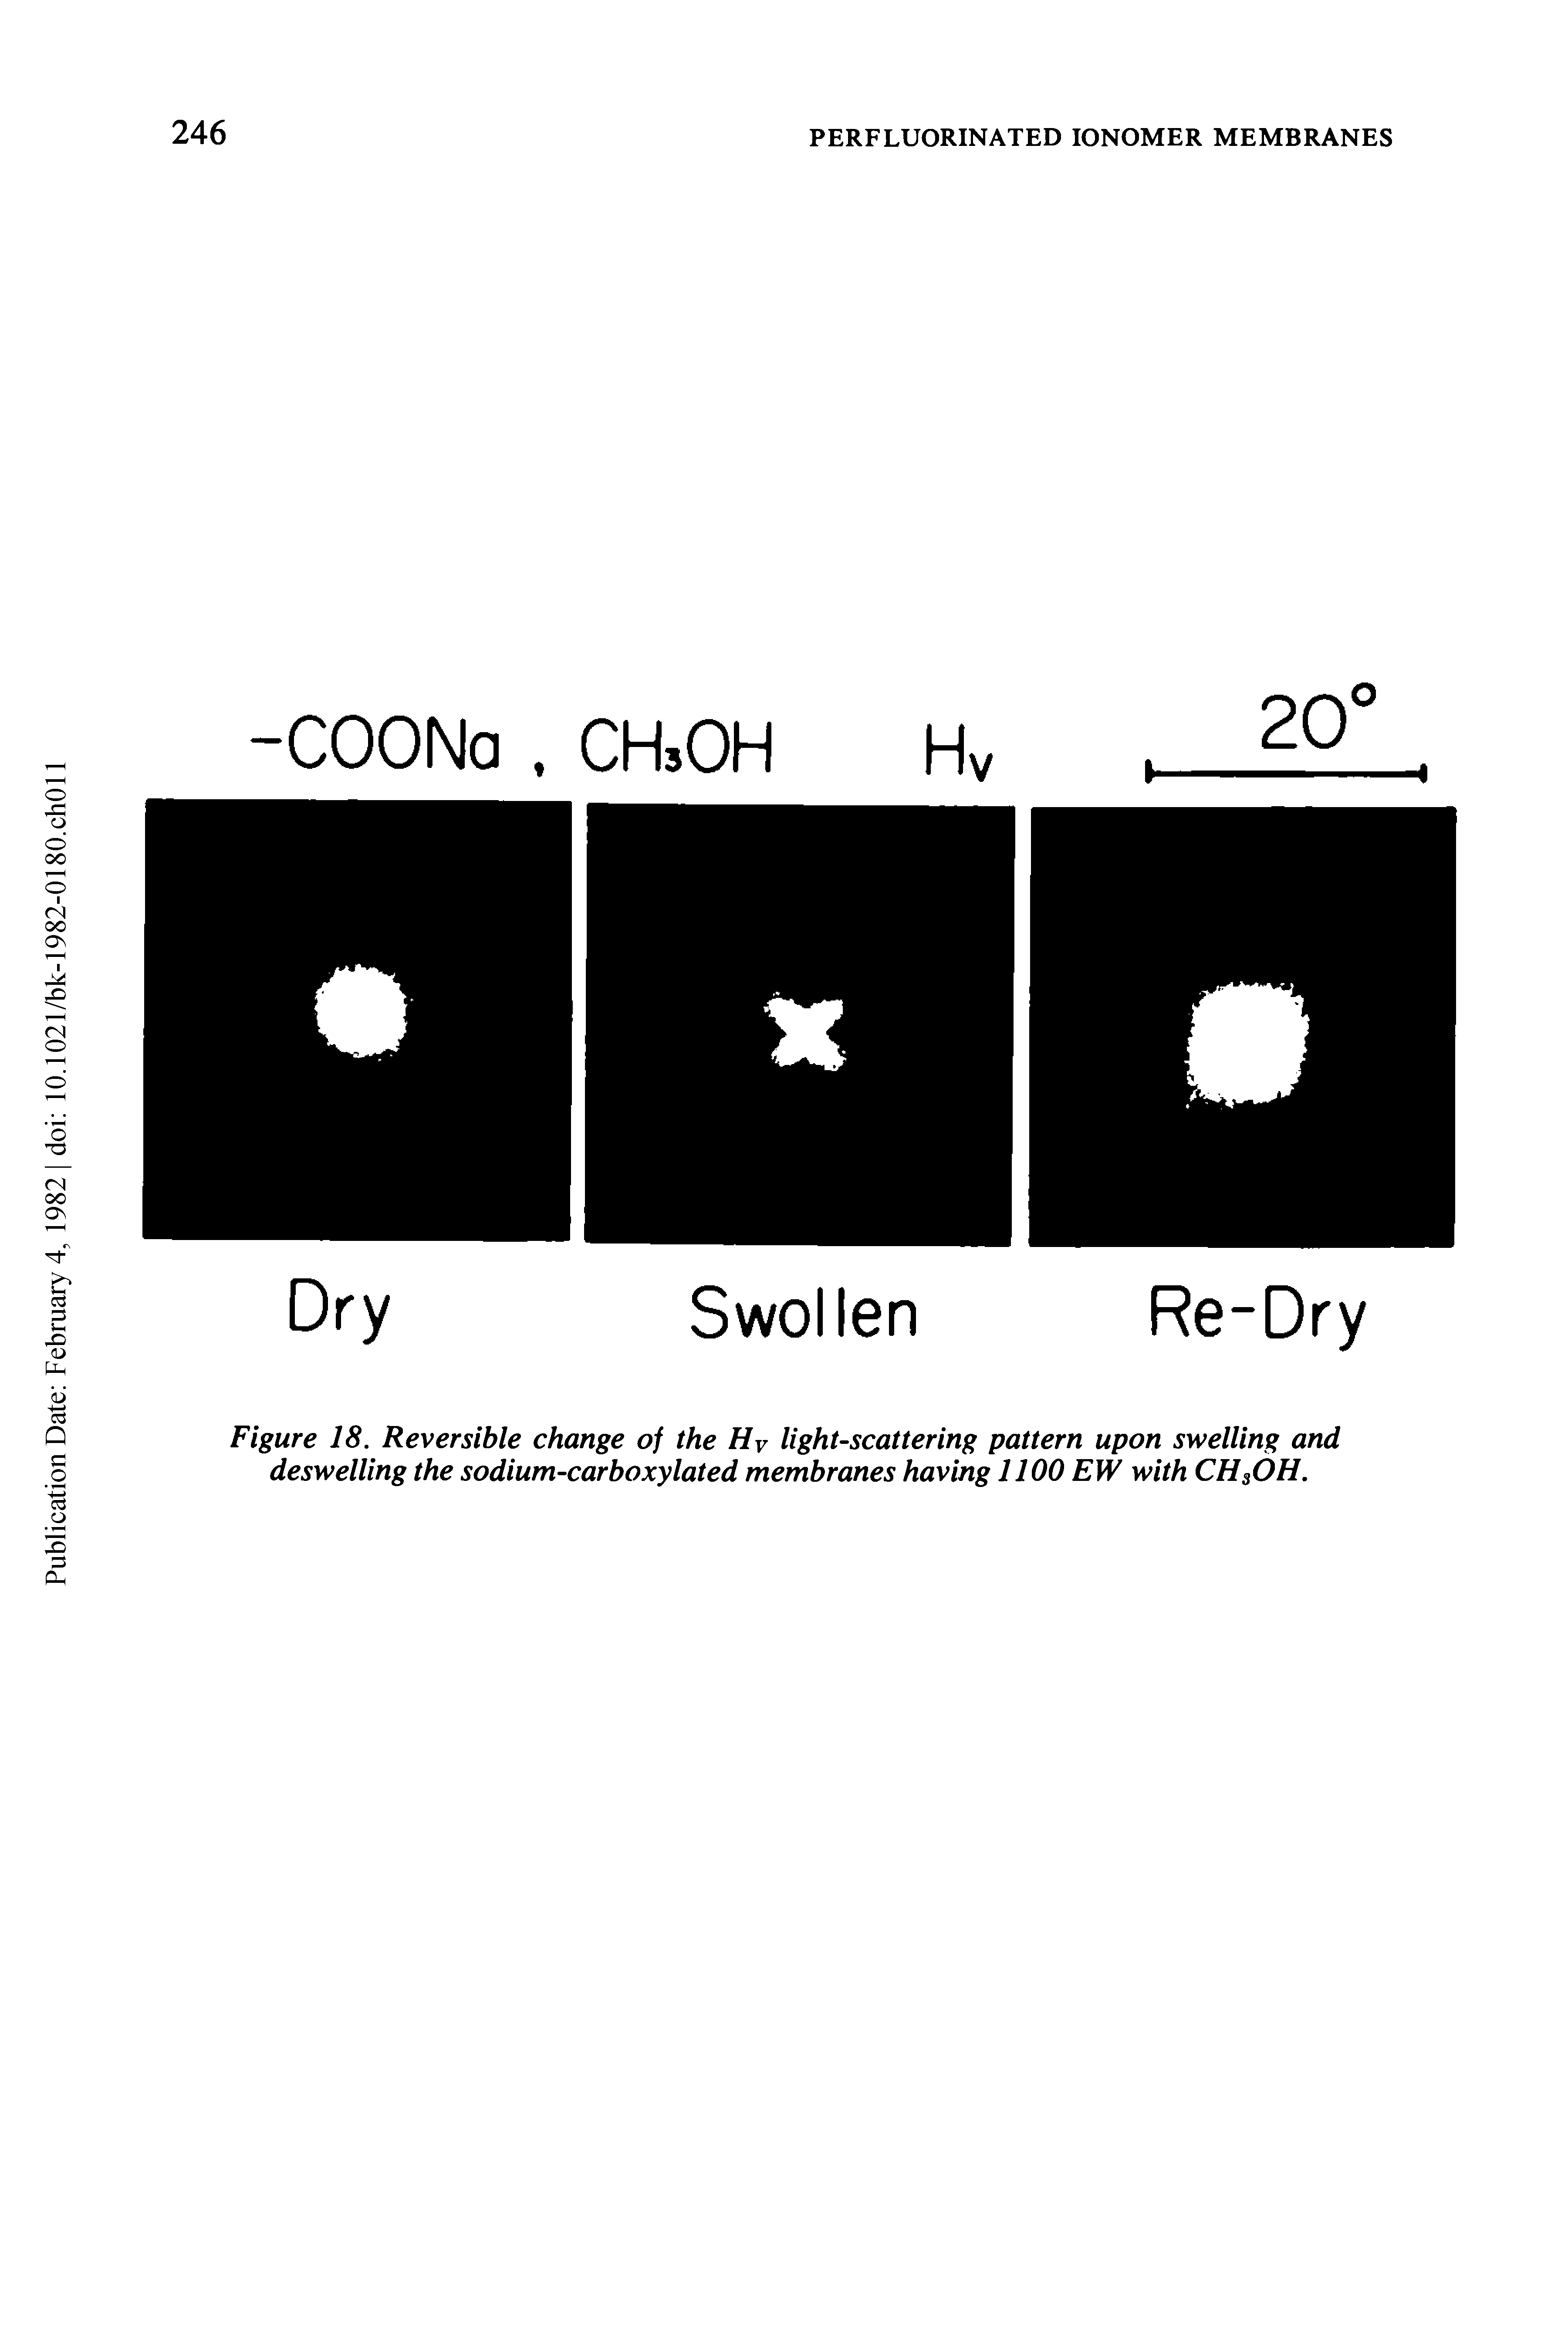 Figure 18. Reversible change of the Hv light-scattering pattern upon swelling and deswelling the sodium-carboxylated membranes having 1100 EW with CH3OH.